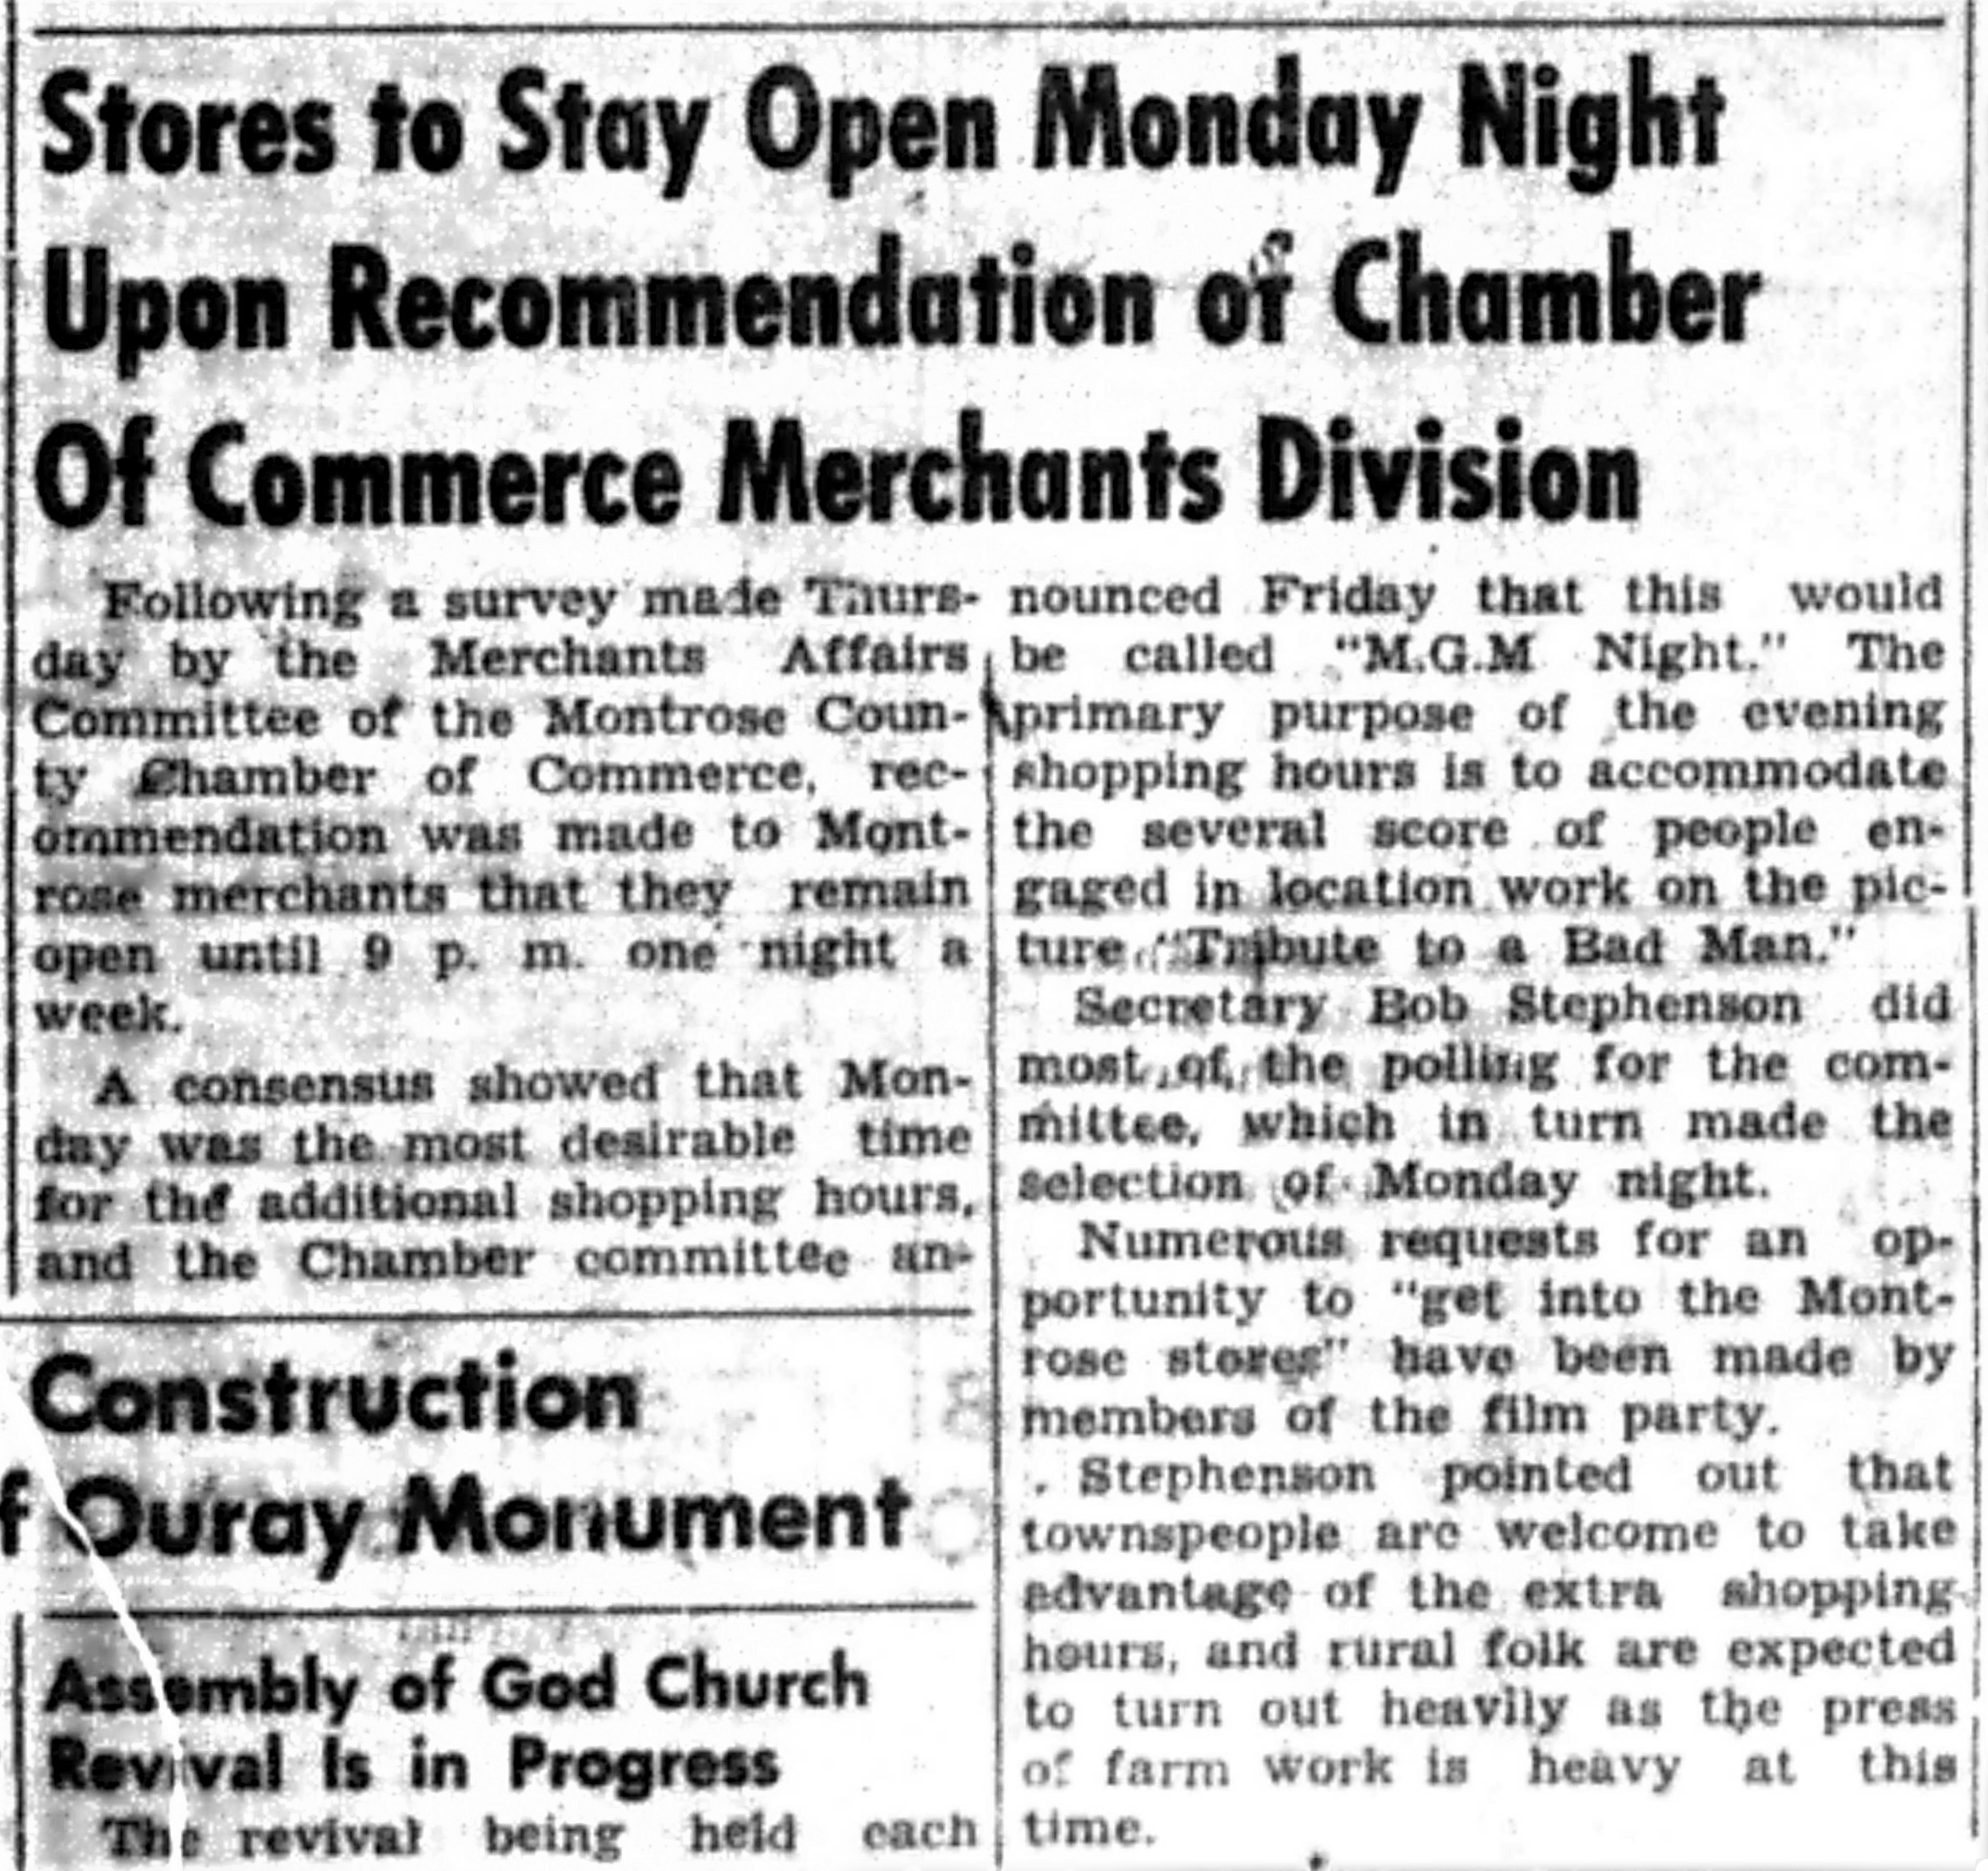   Montrose Daily Press , Montrose, Colo., Saturday, June 11, 1955. Courtesy of Adult Services. 